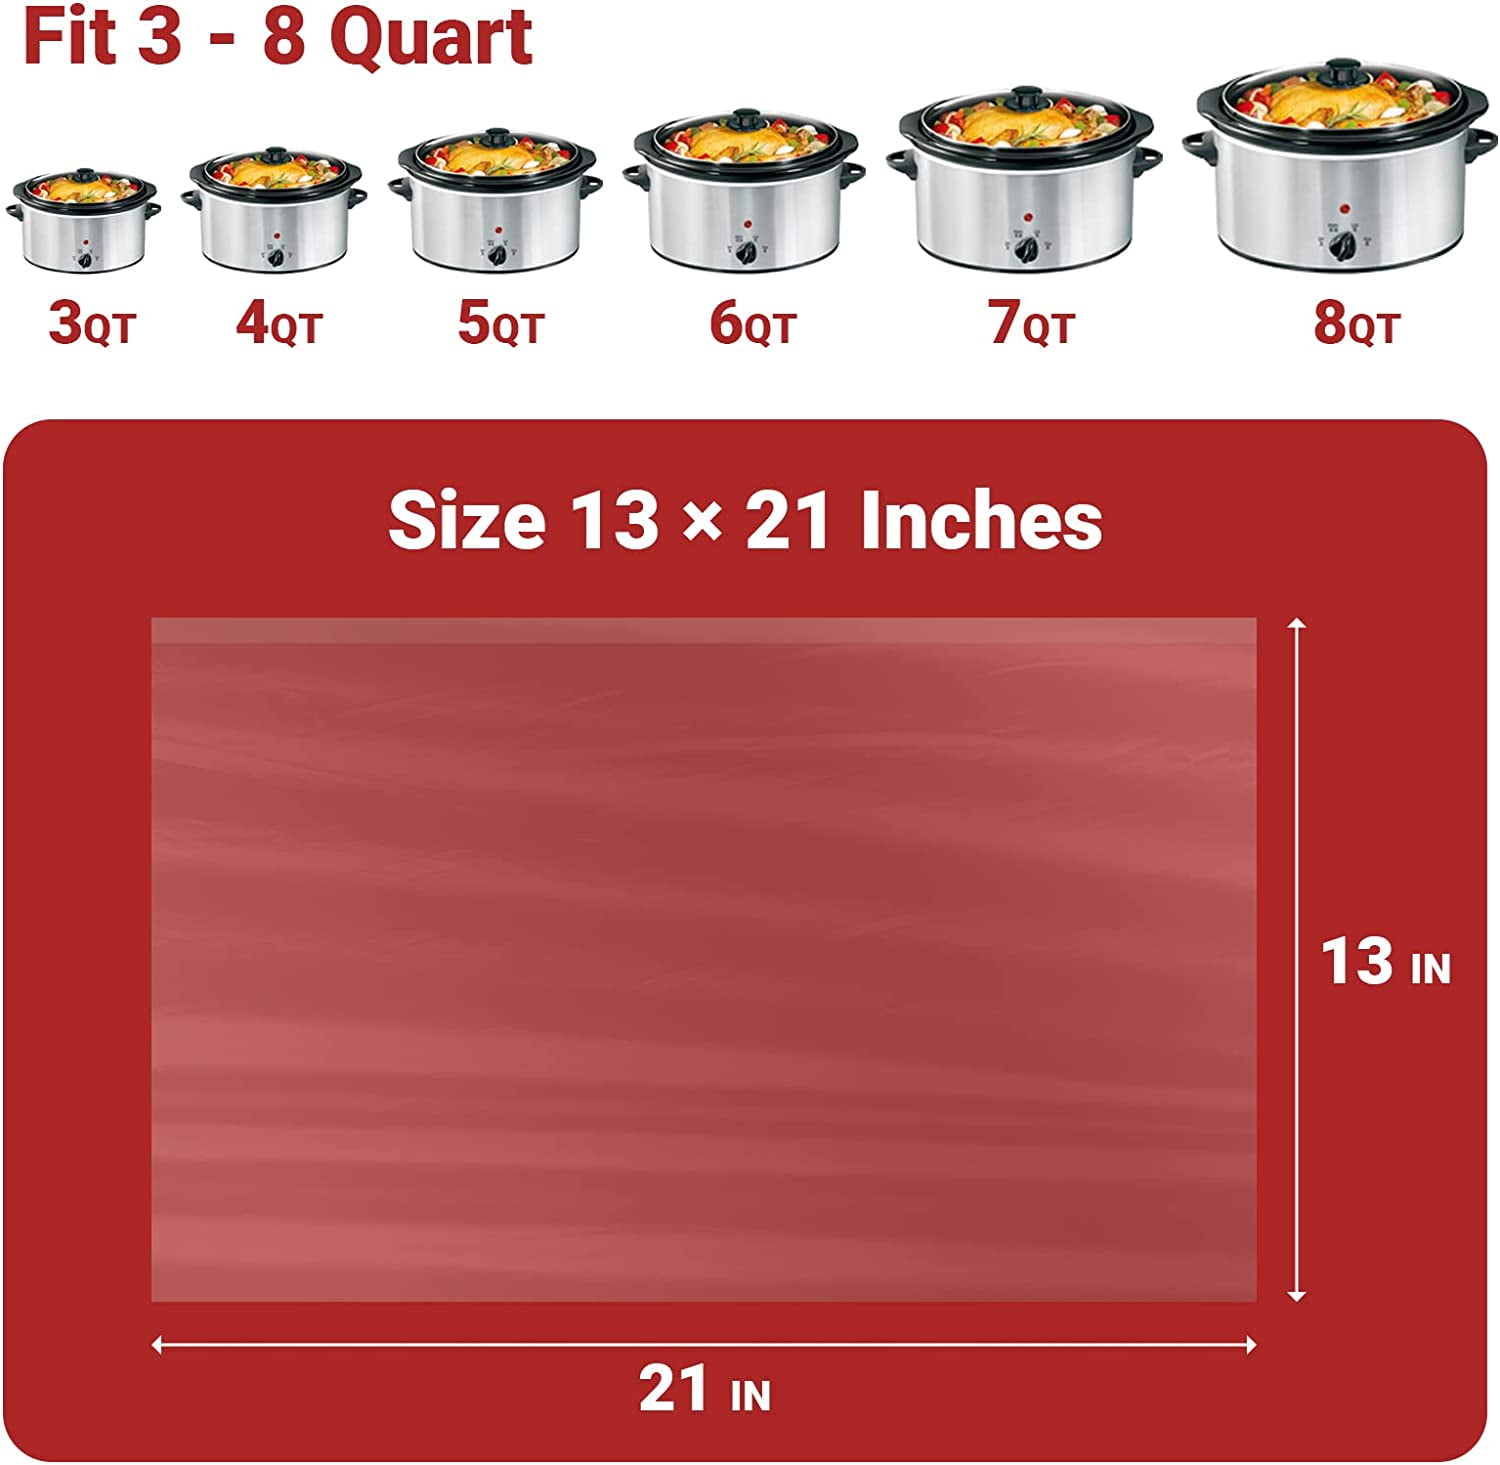  Party Bargains 30 Bags Slow Cooker Liners - Fits 7-8 Quarts, 21  x 4 x 13 Inches, 4 Wide Gusset, X-Large Crock Pot Liners, Multi Use  Cooking Bags, Sous Vide: Home & Kitchen